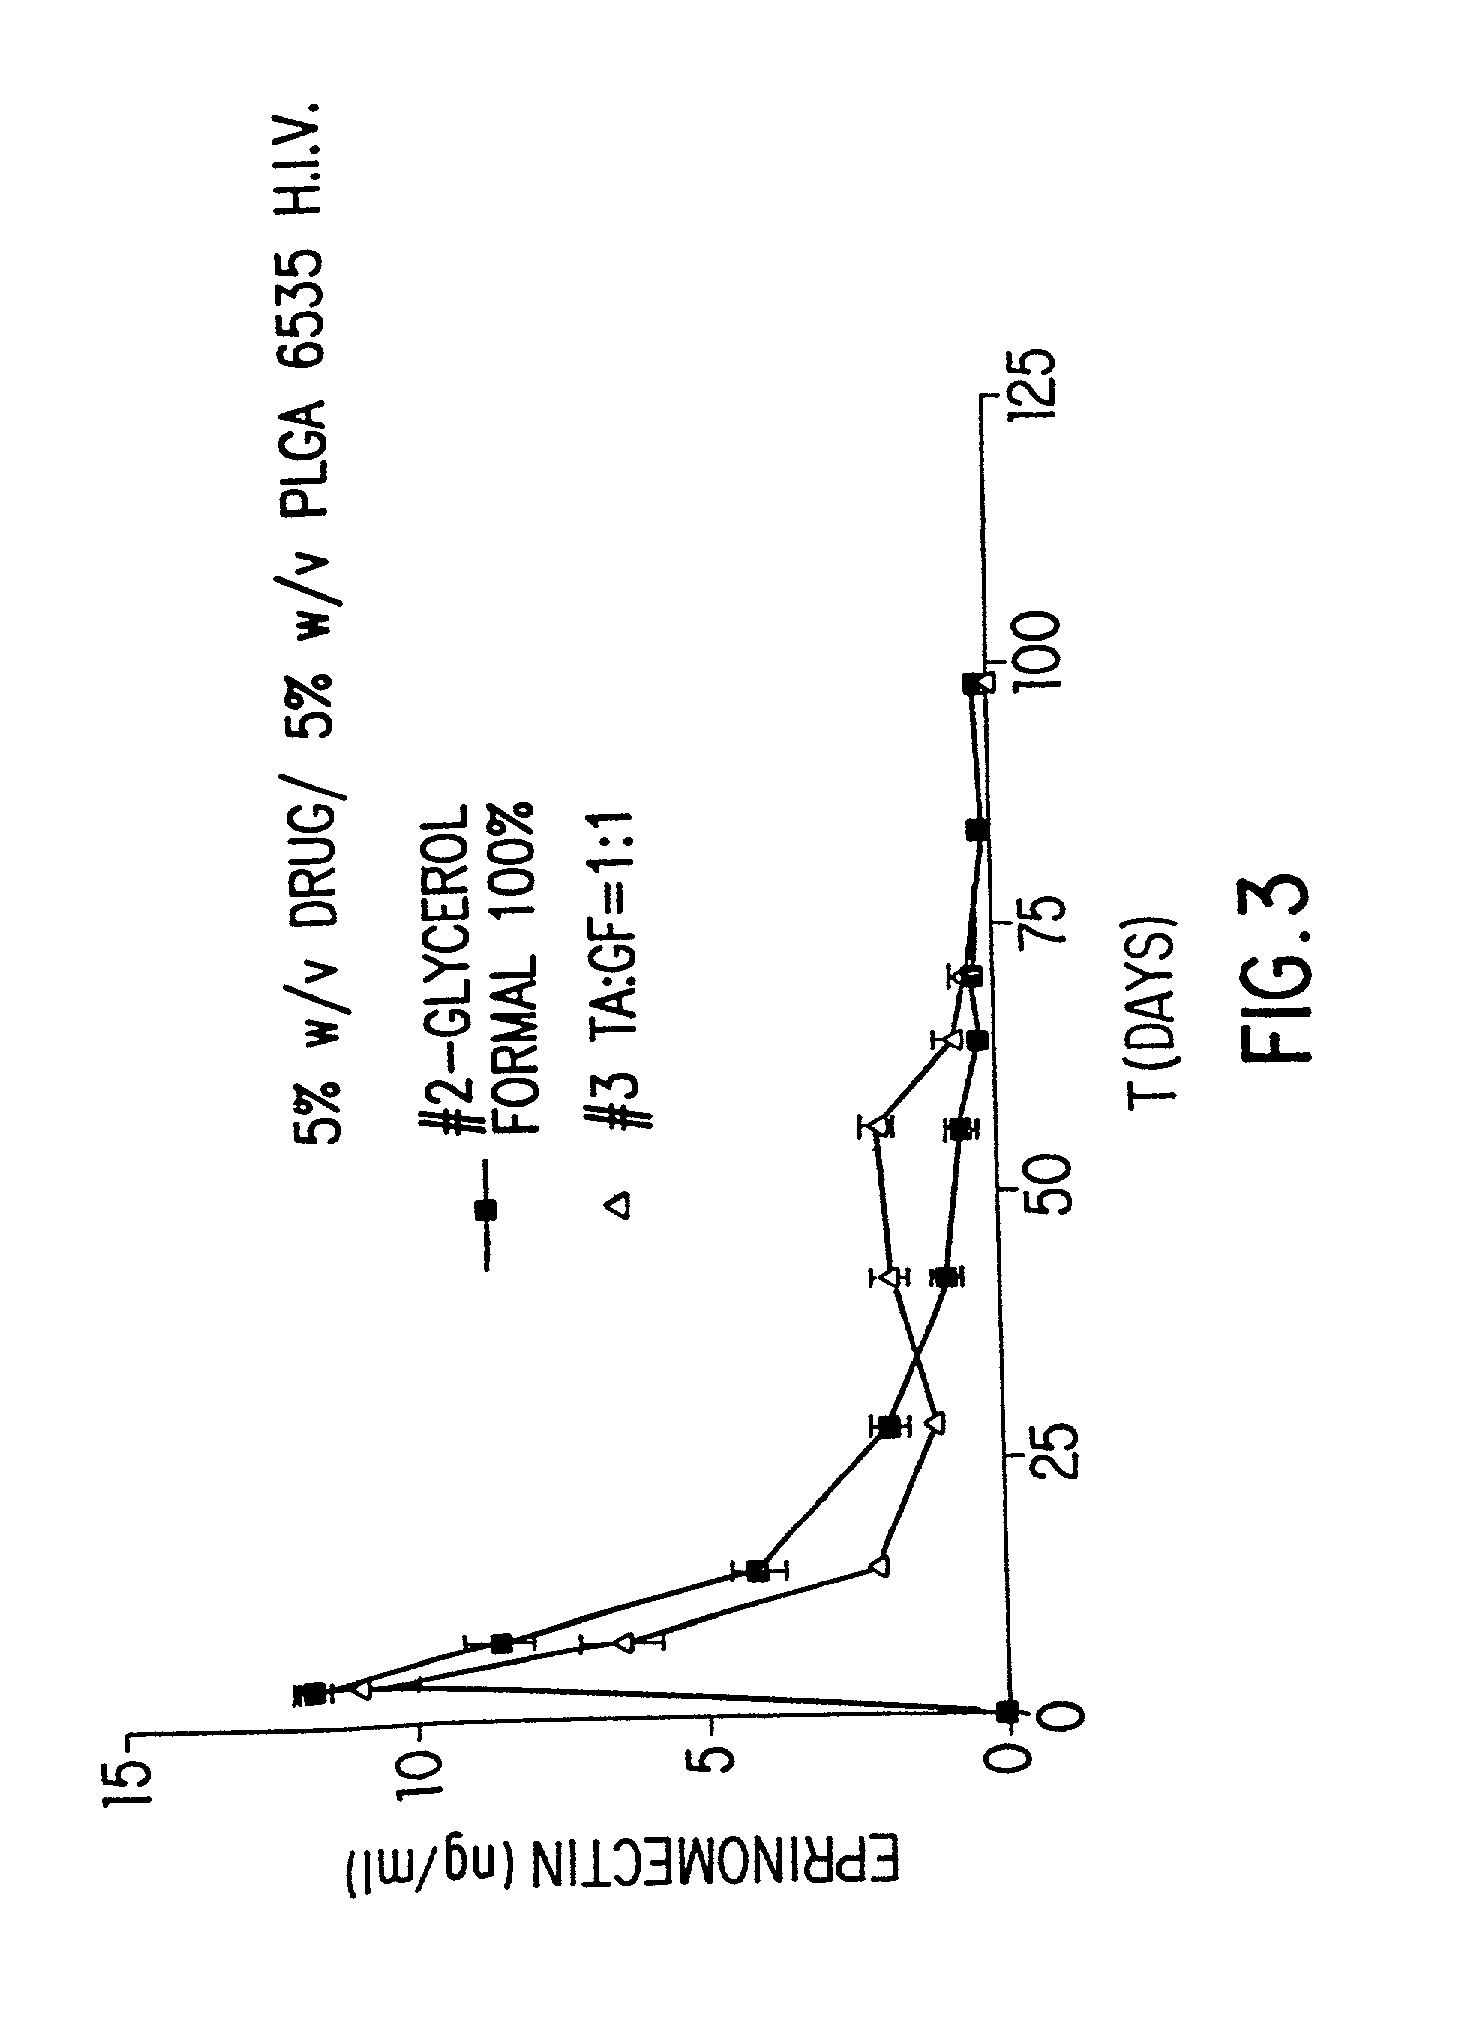 Liquid polymeric compositions for controlled release of bioactive substances